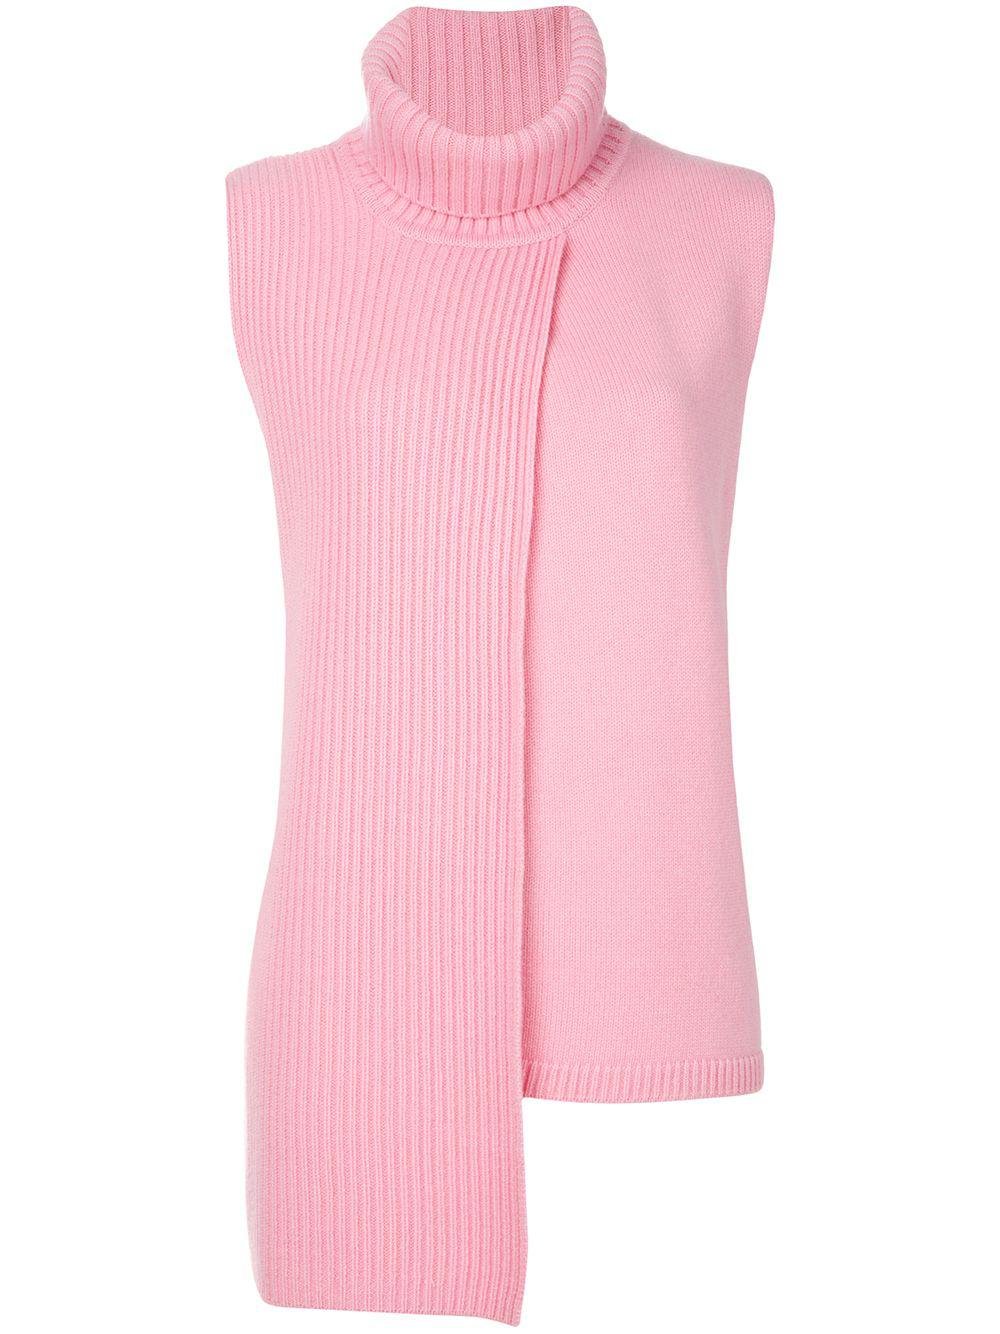 cashmere Tania turtleneck top by CASHMERE IN LOVE